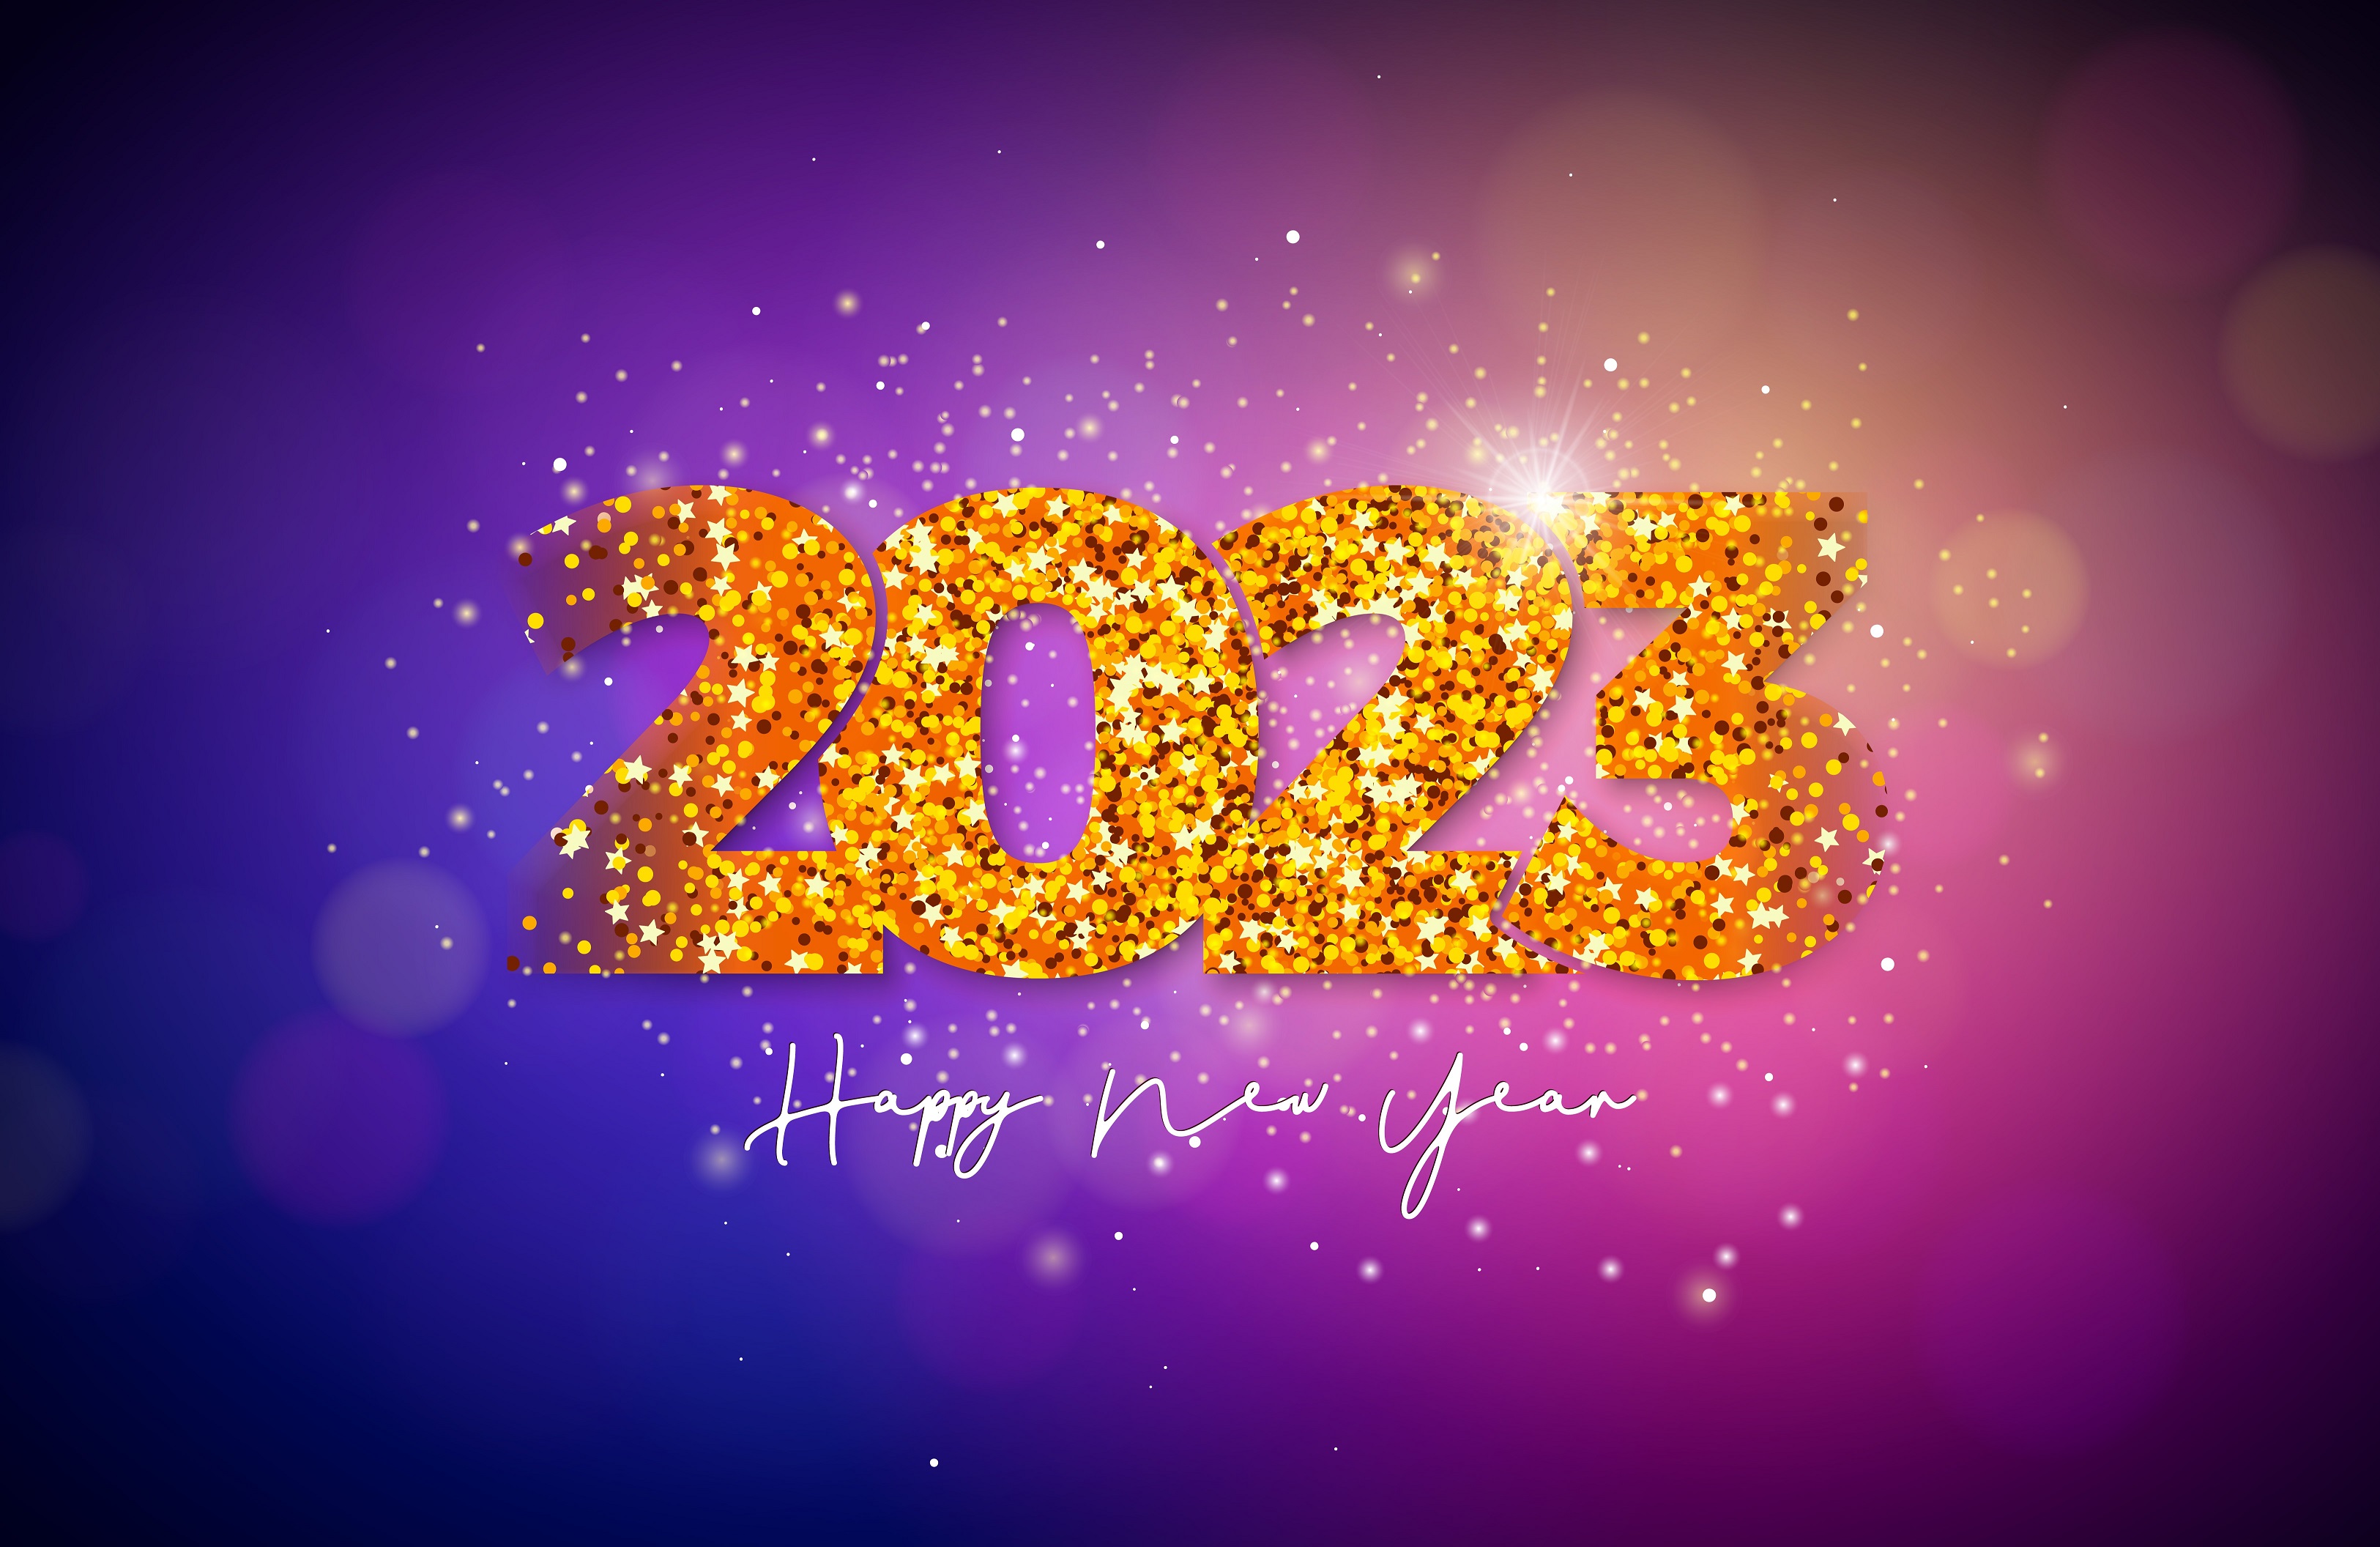 General 3250x2112 2023 (year) New Year Christmas simple background holiday